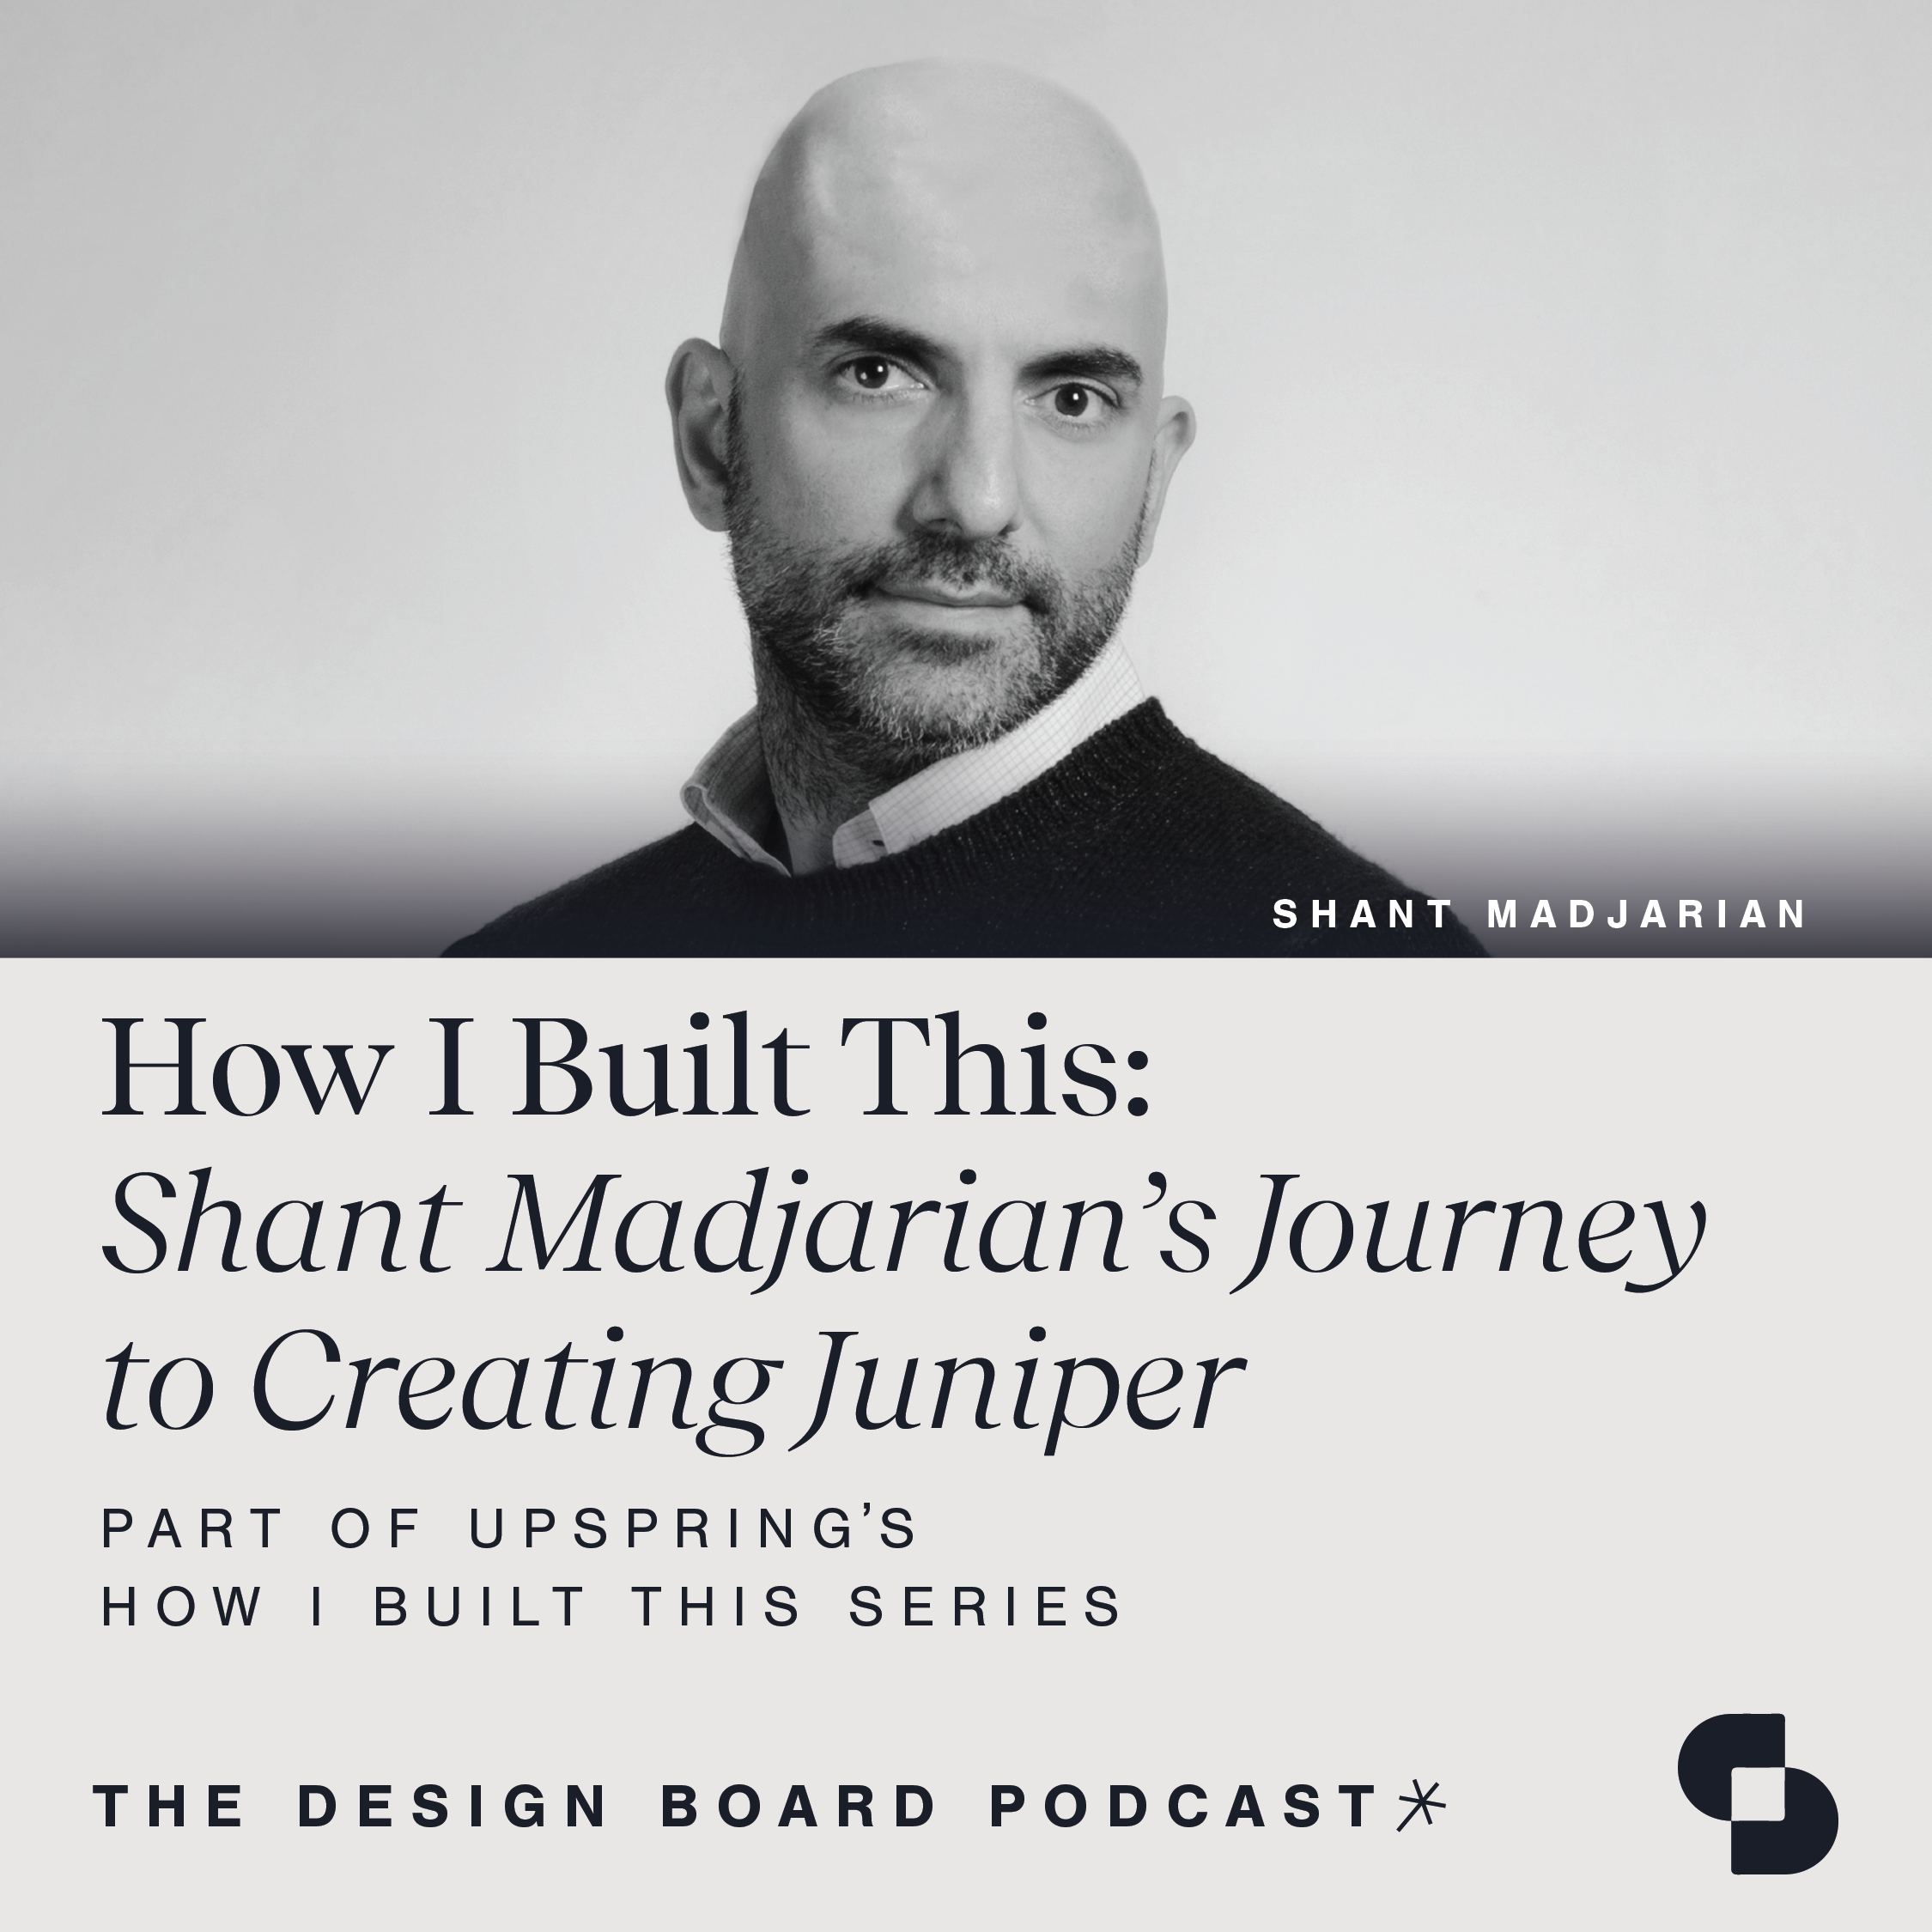 How I Built This: Shant Madjarian's Journey to Creating Juniper, episode cover artwork